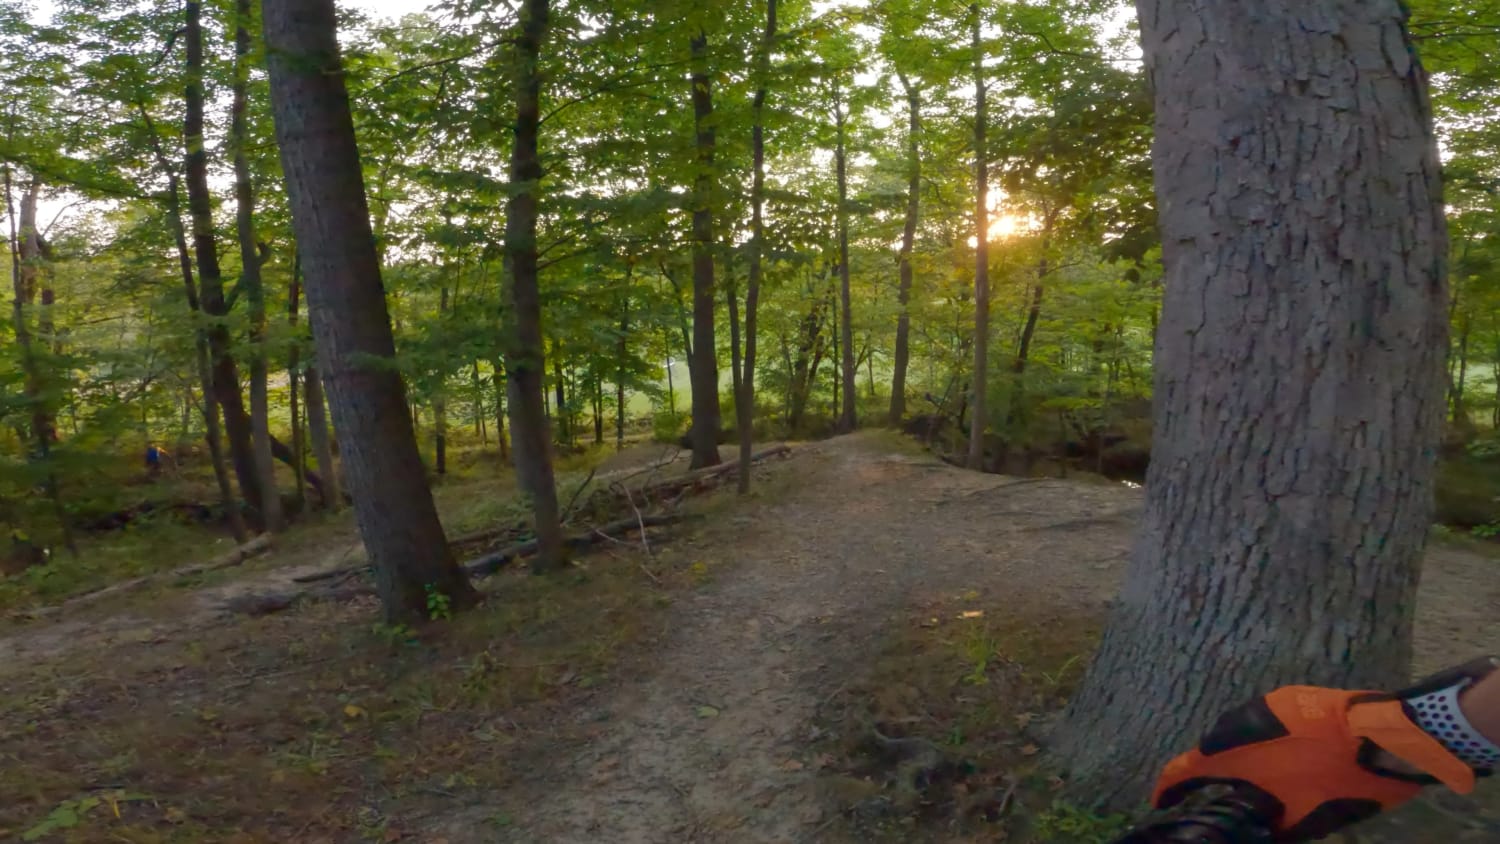 GoPro 11 low light MTB test (45 minutes from sunset)